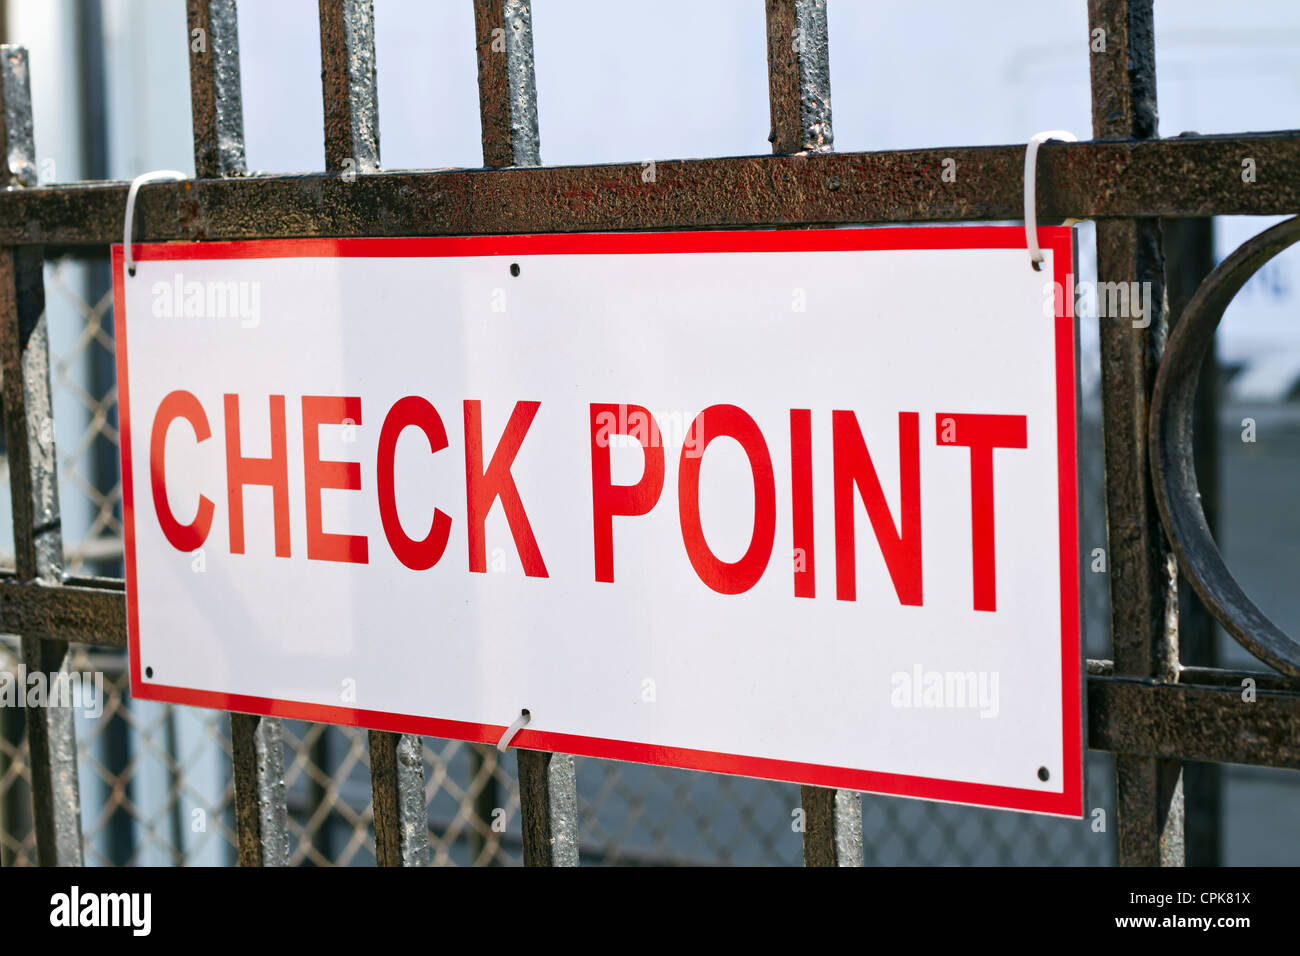 Photograph of a security checkpoint sign Stock Photo